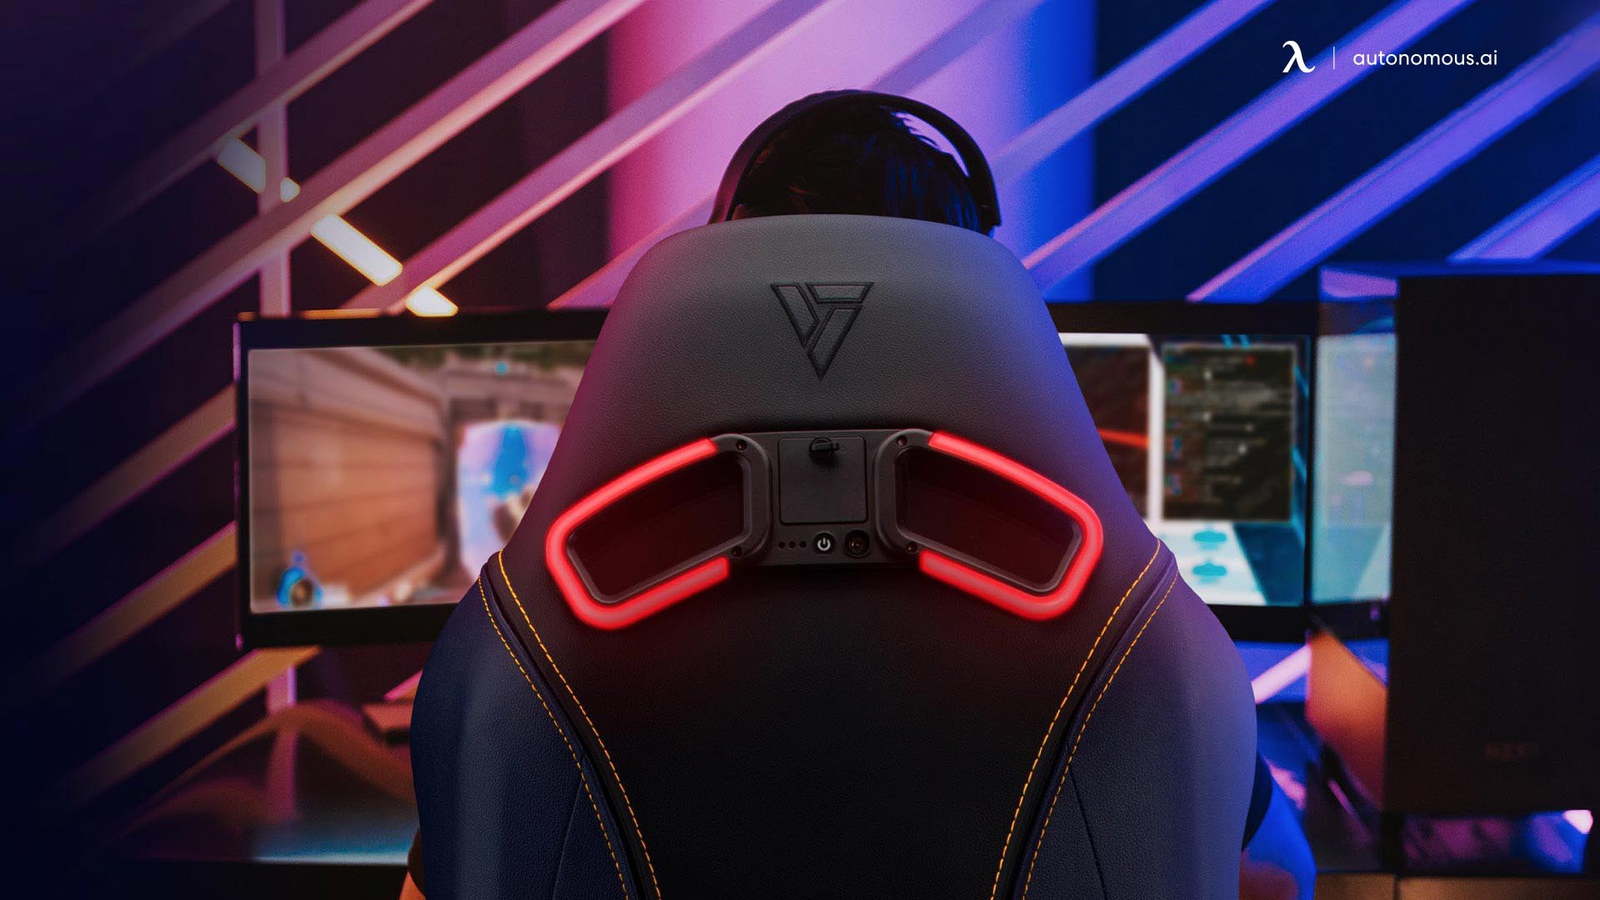 Review of Vertagear Gaming Chairs – Which One is the Best?